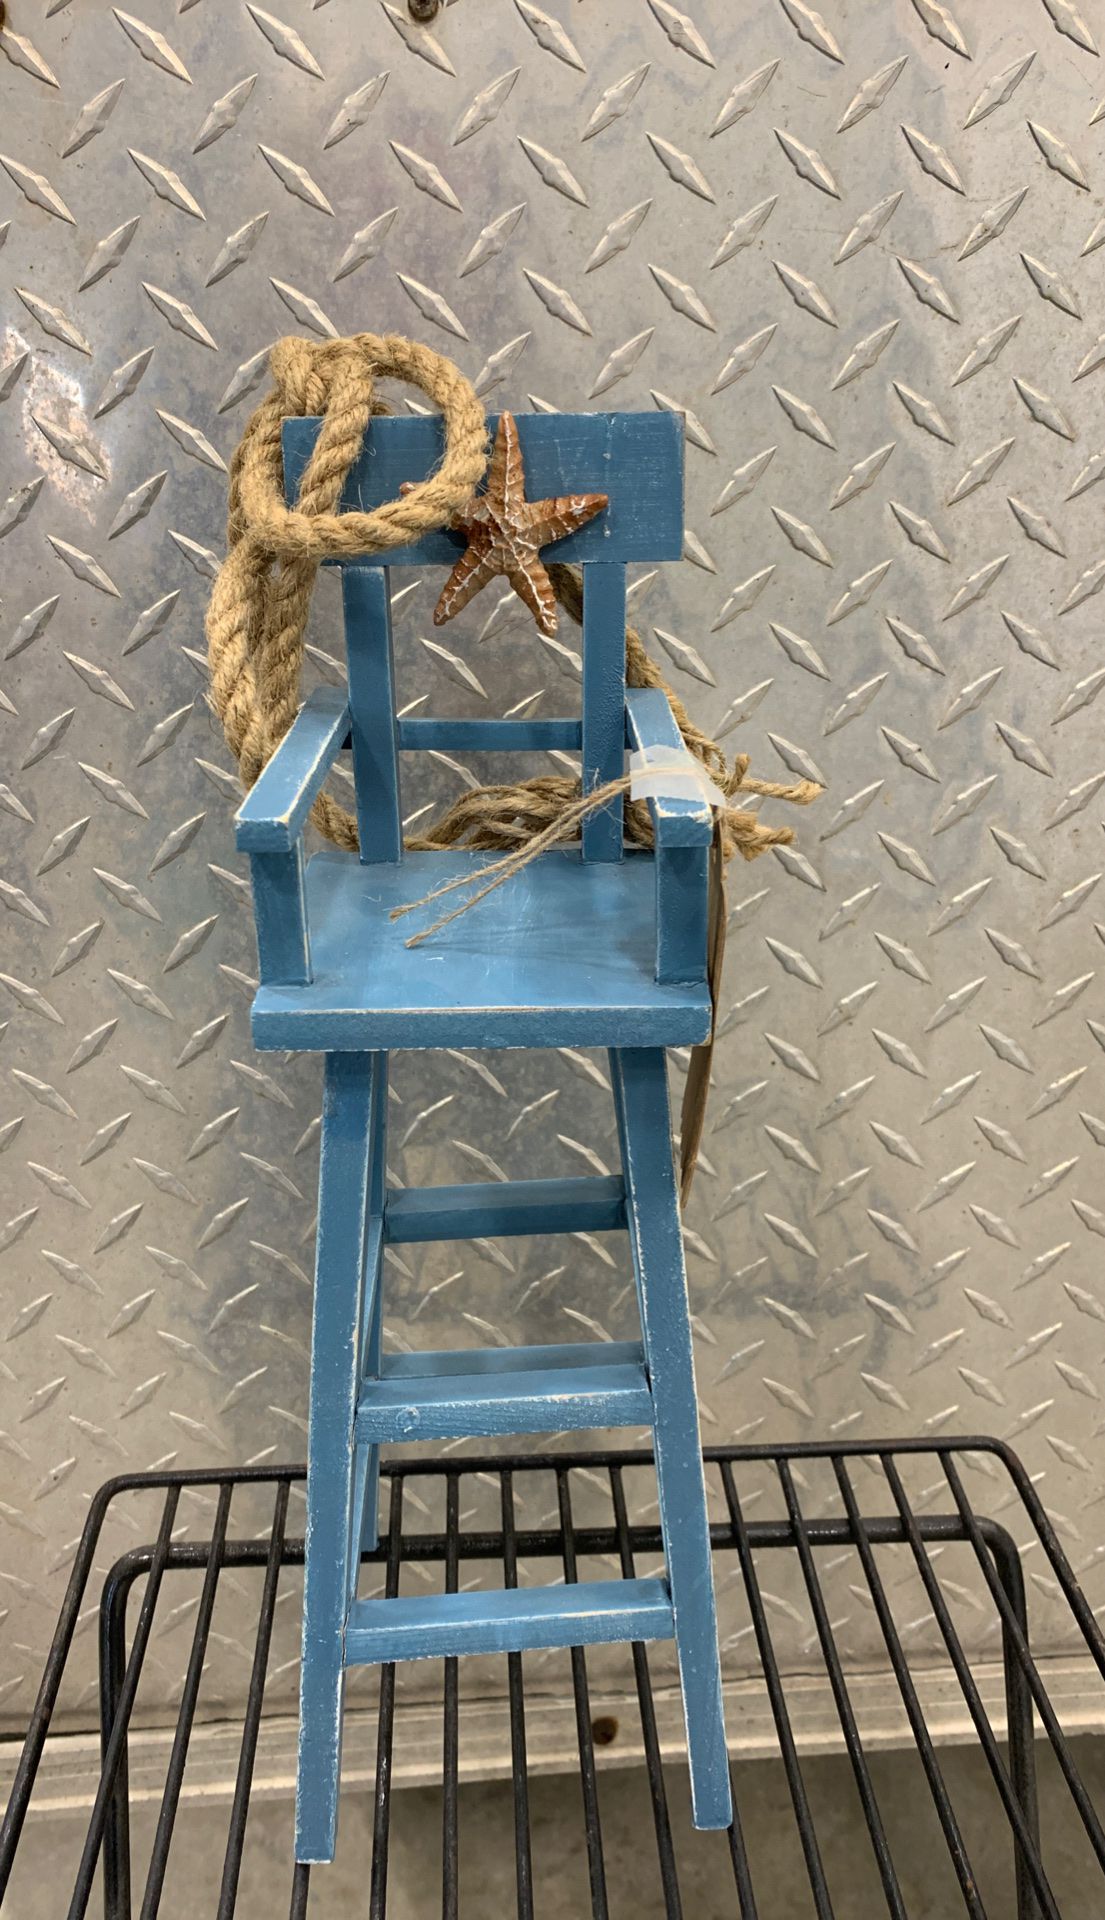 Beach chair with attached rope